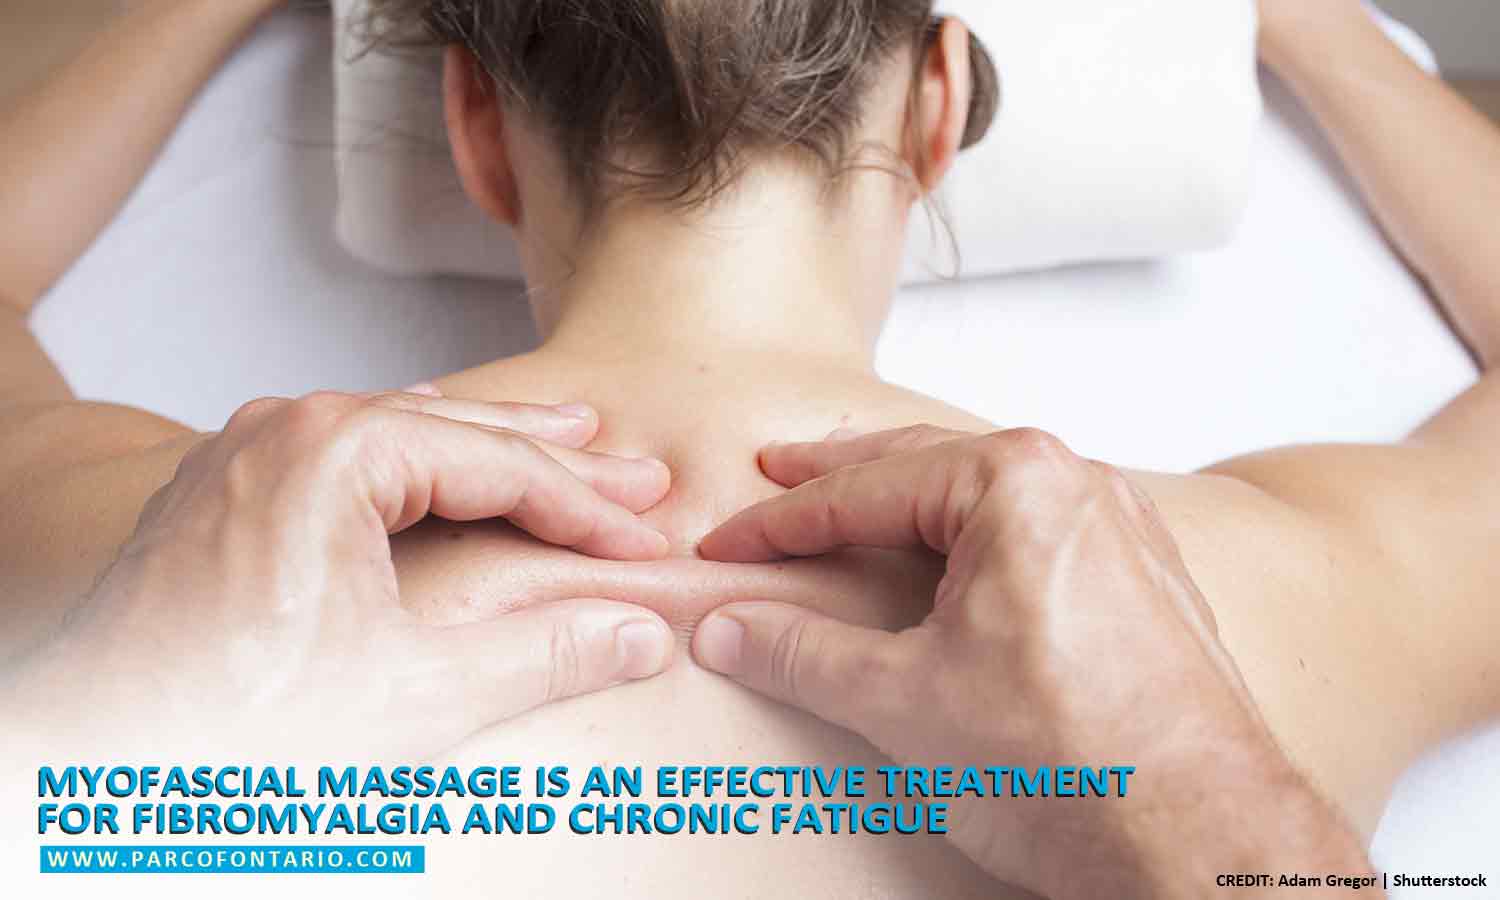 https://www.parcofontario.com/wp-content/uploads/2021/02/Soften-muscle-knots-and-alleviate-pain-using-trigger-point-massage.jpg